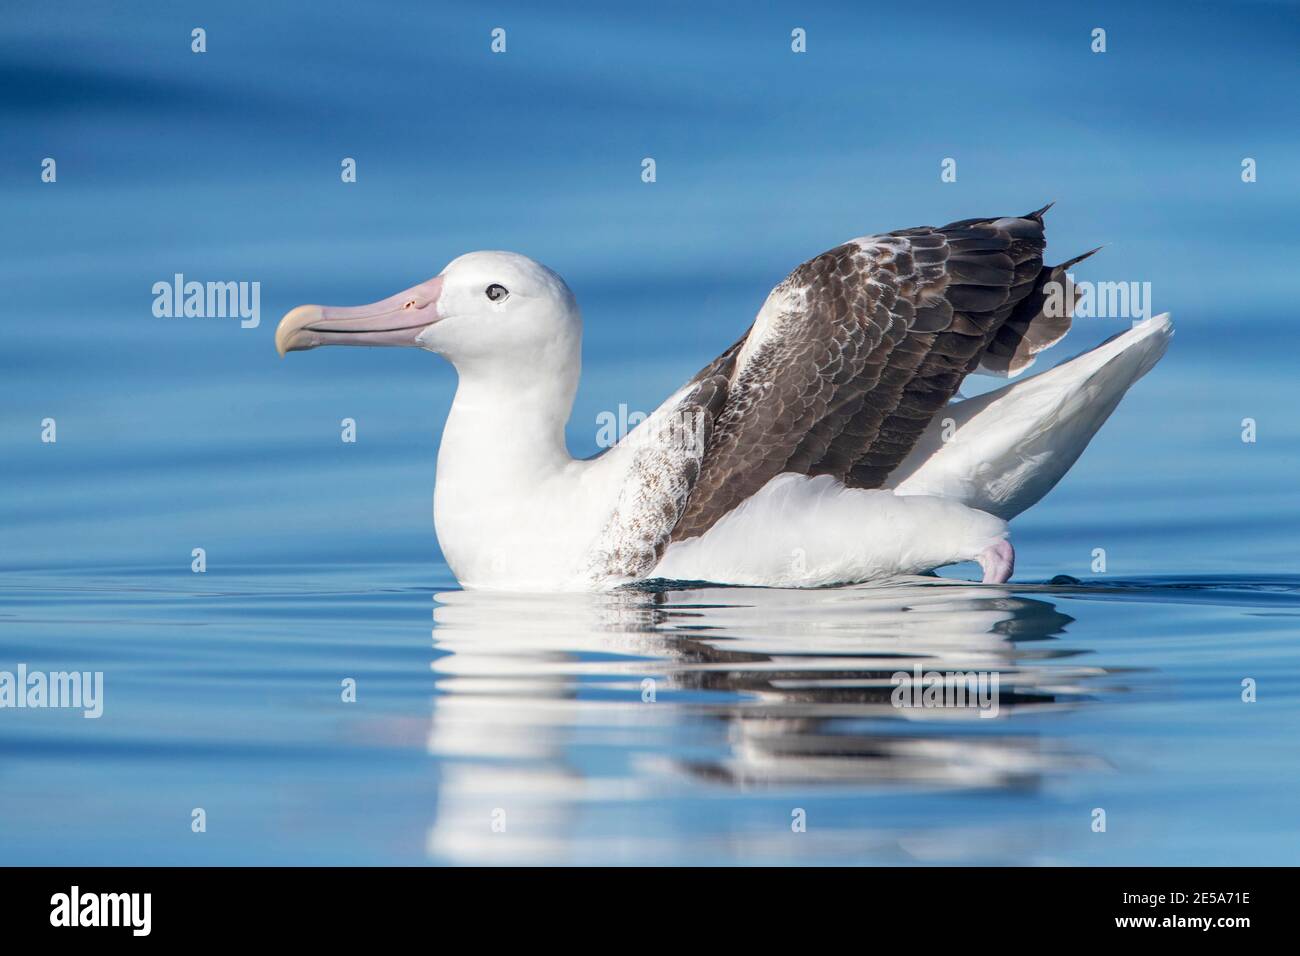 Royal albatross, Southern Royal Albatross (Diomedea epomophora), Adult swimming on a smooth ocean surface, New Zealand, Auckland islands Stock Photo